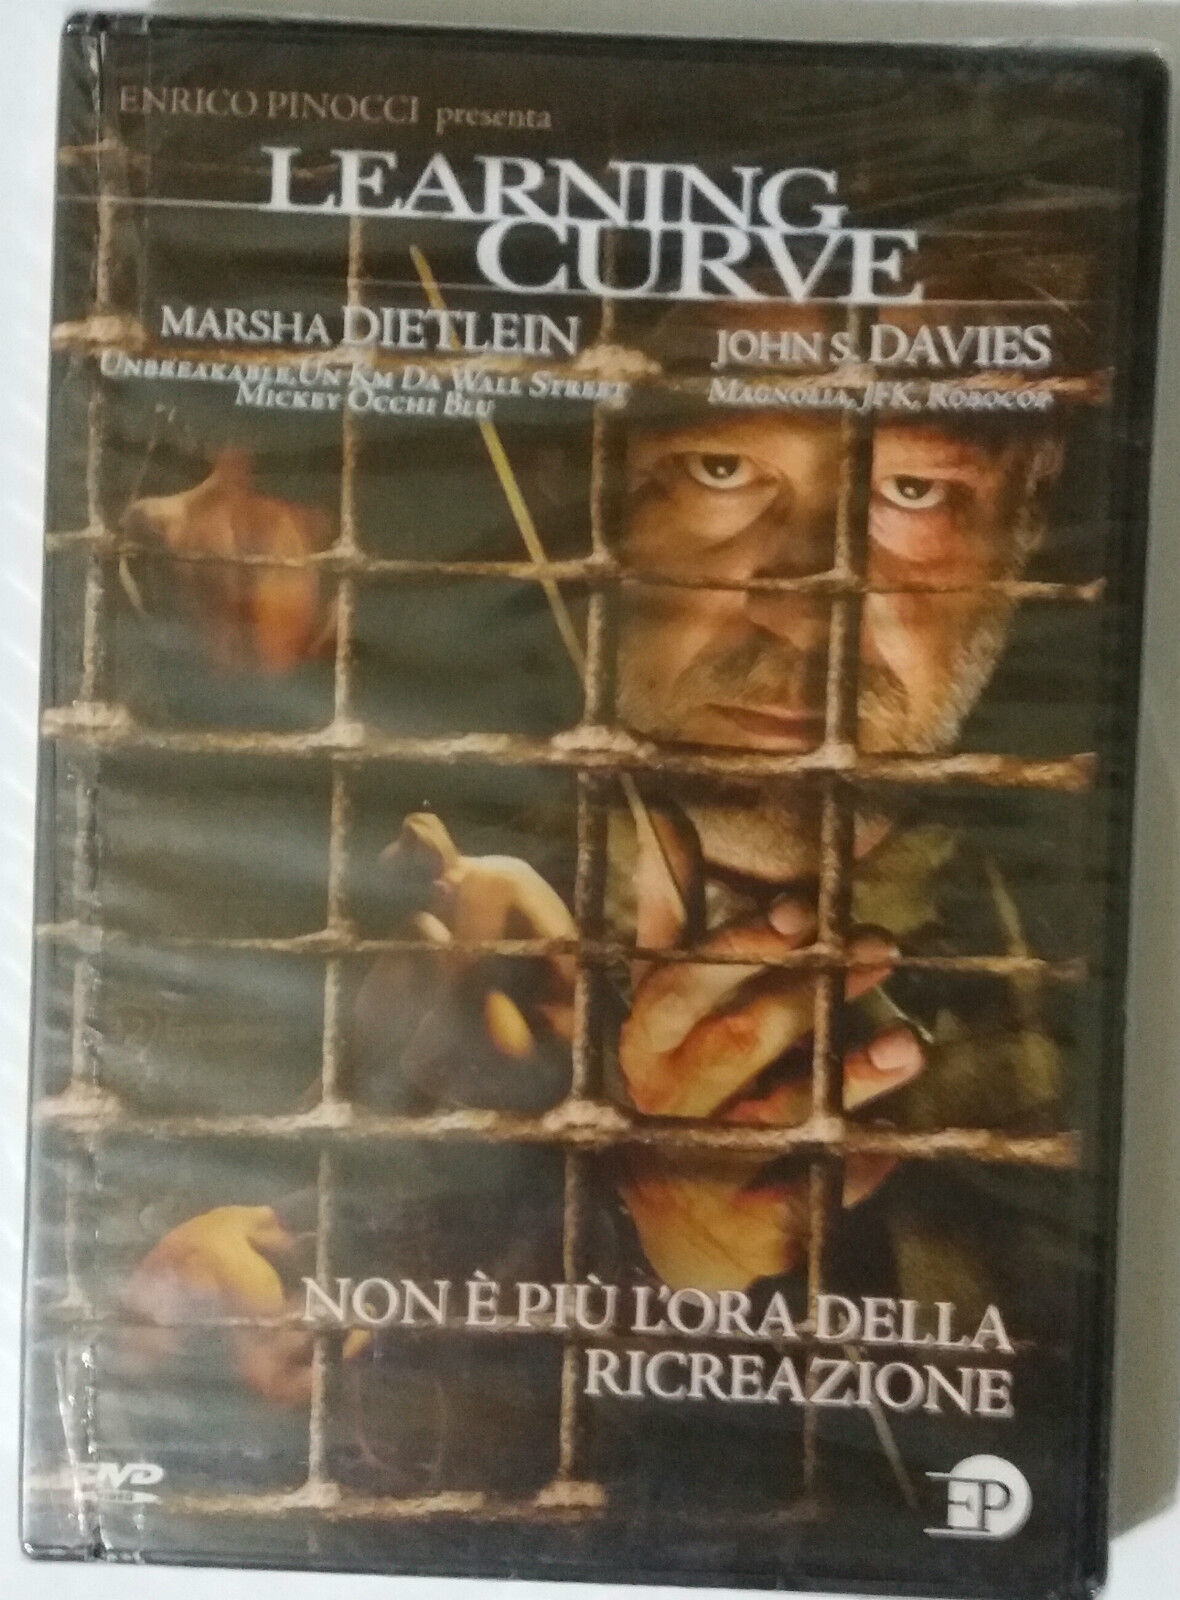 Learning Curve - Andy Anderson - Enrico Pinocci - 2000 - DVD - G dvd usato